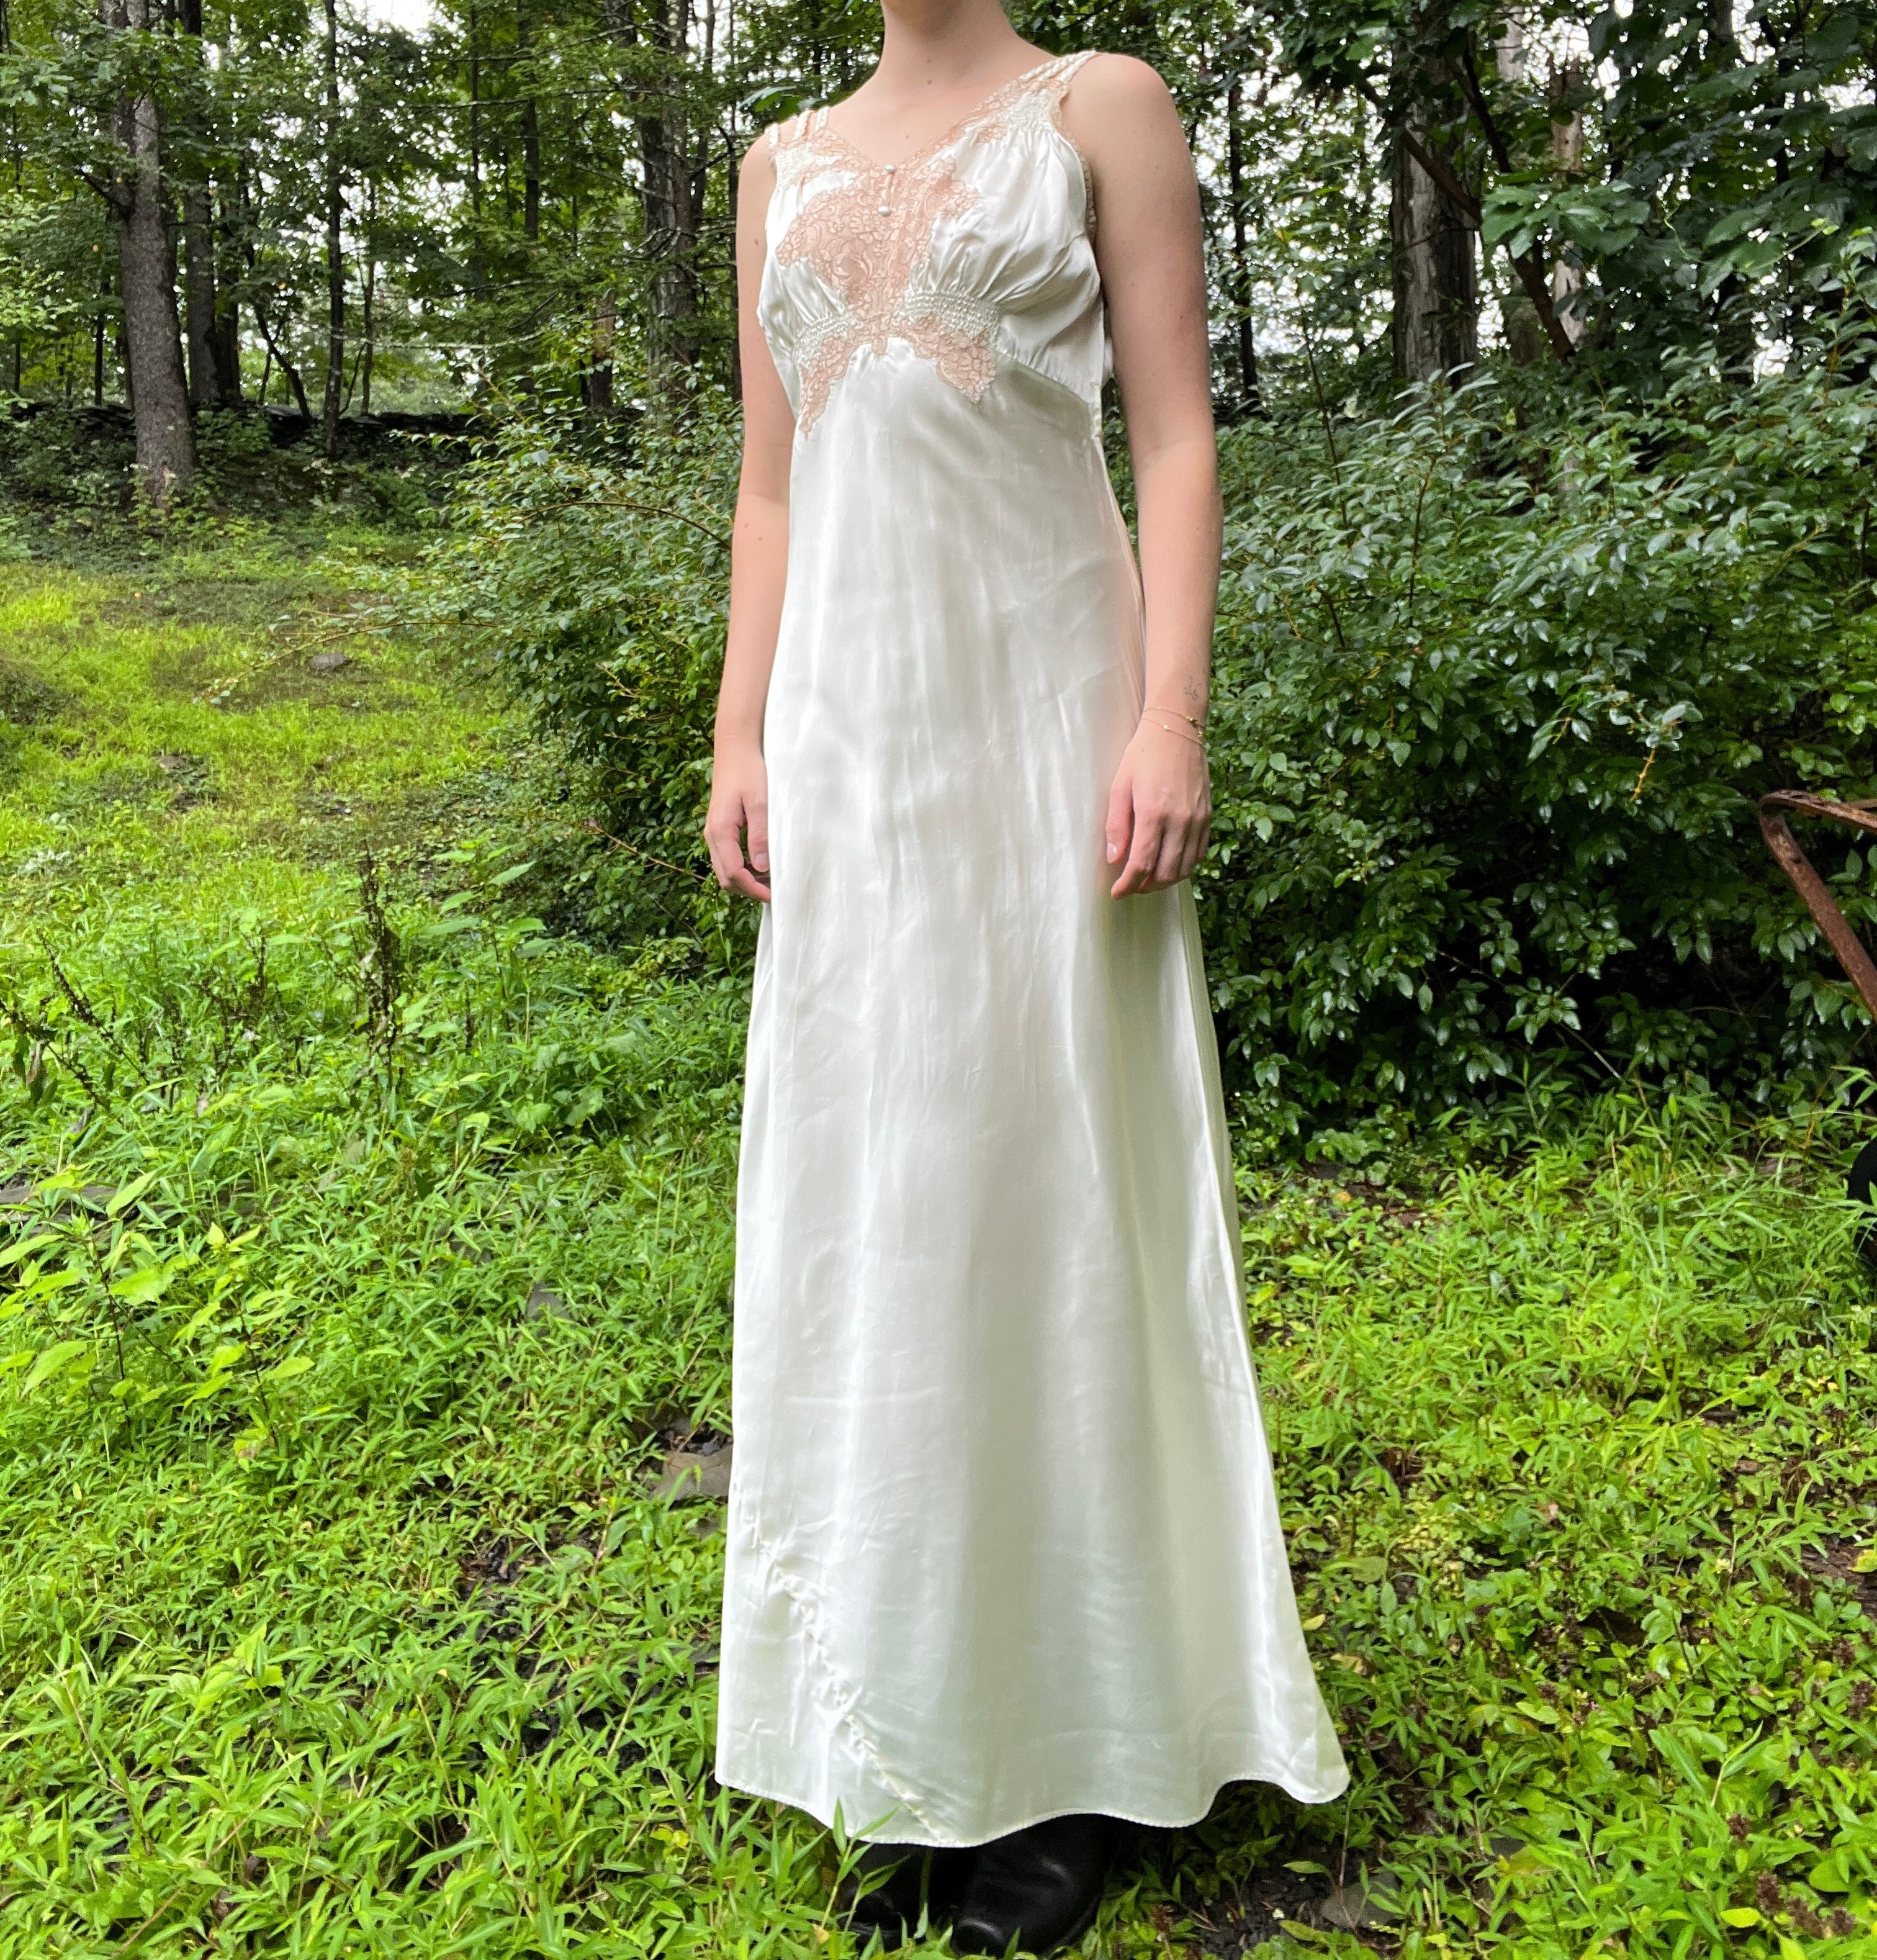 1930's White Satin Slip Dress with Lace